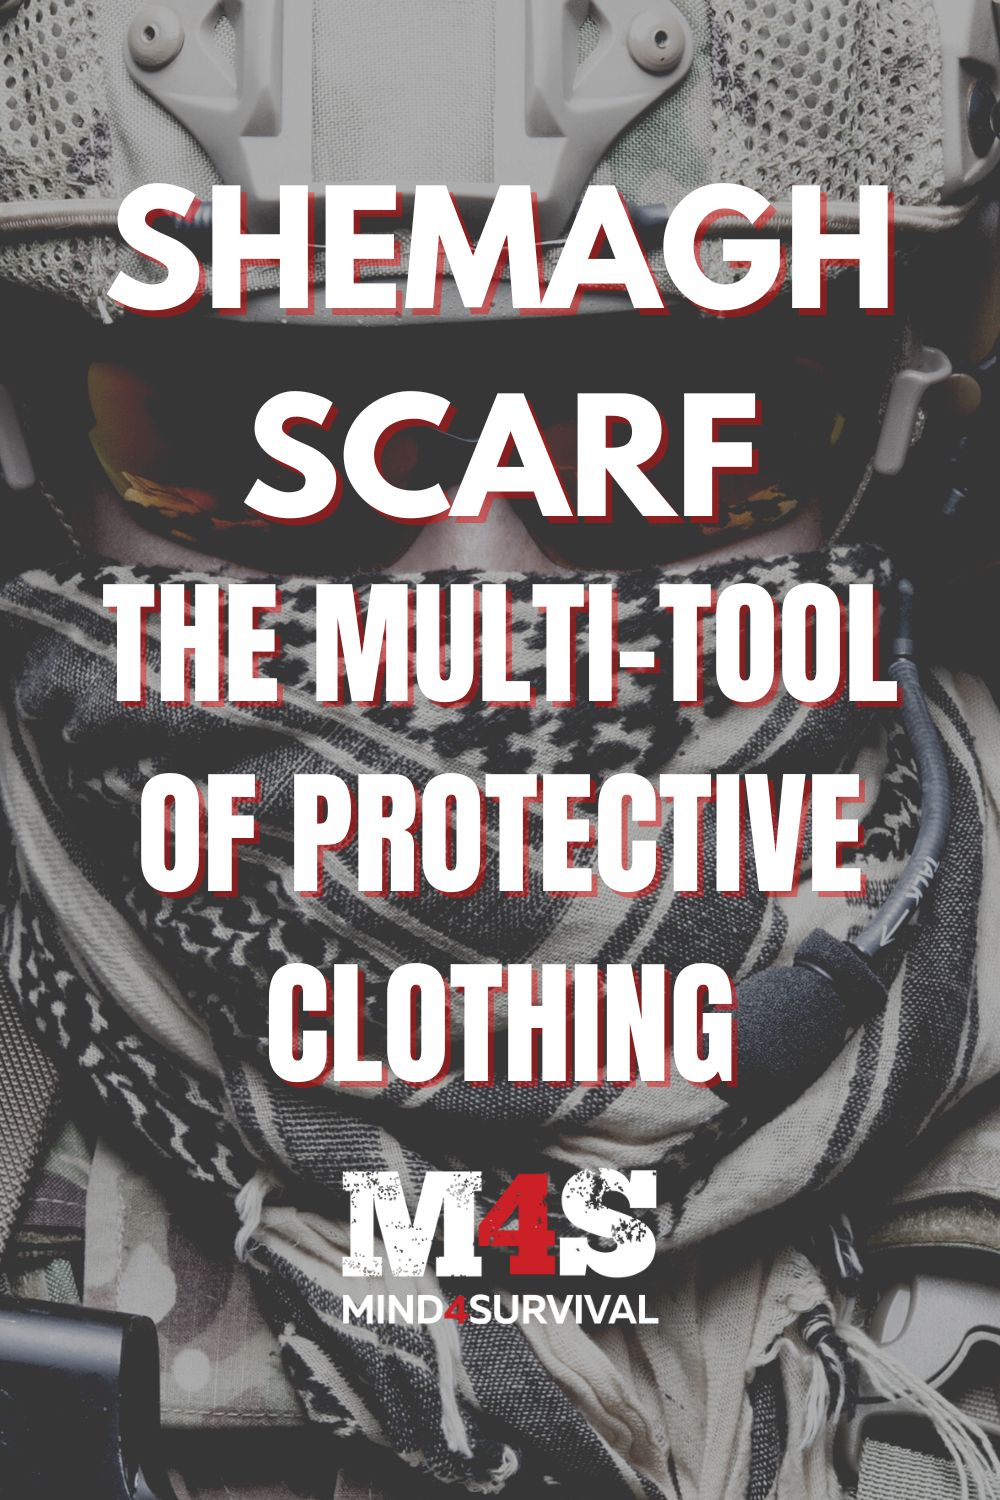 Shemagh Scarf - The Multitool of Protective Clothing